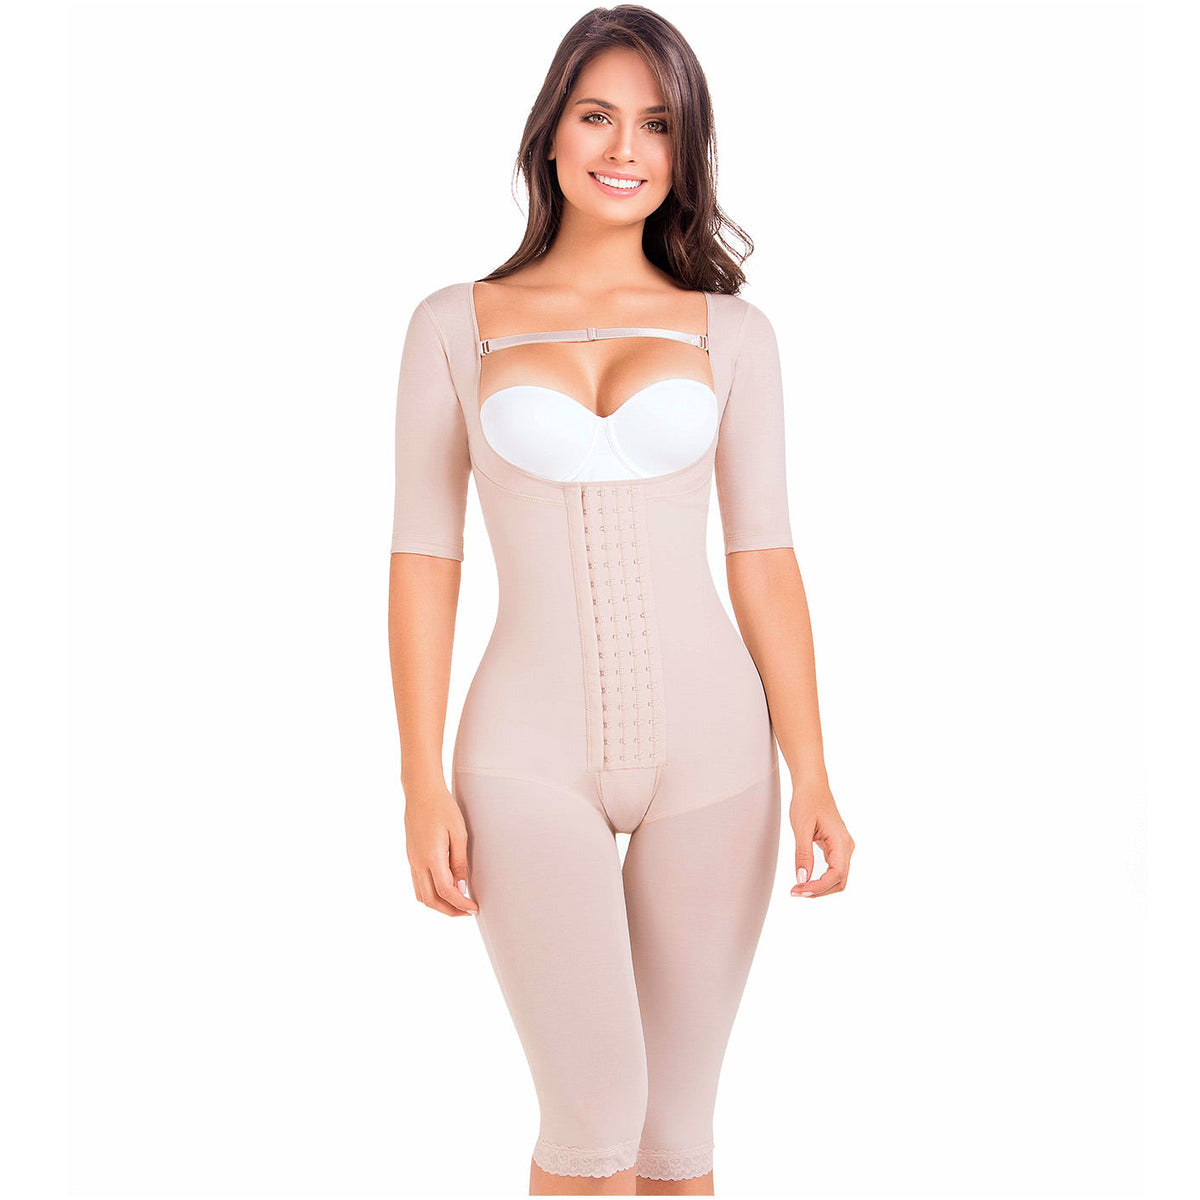 Fajas MariaE 9142 Long Sleeve Postoperative Shapewear With Over Bust Strap | After Pregnancy Compression Garment